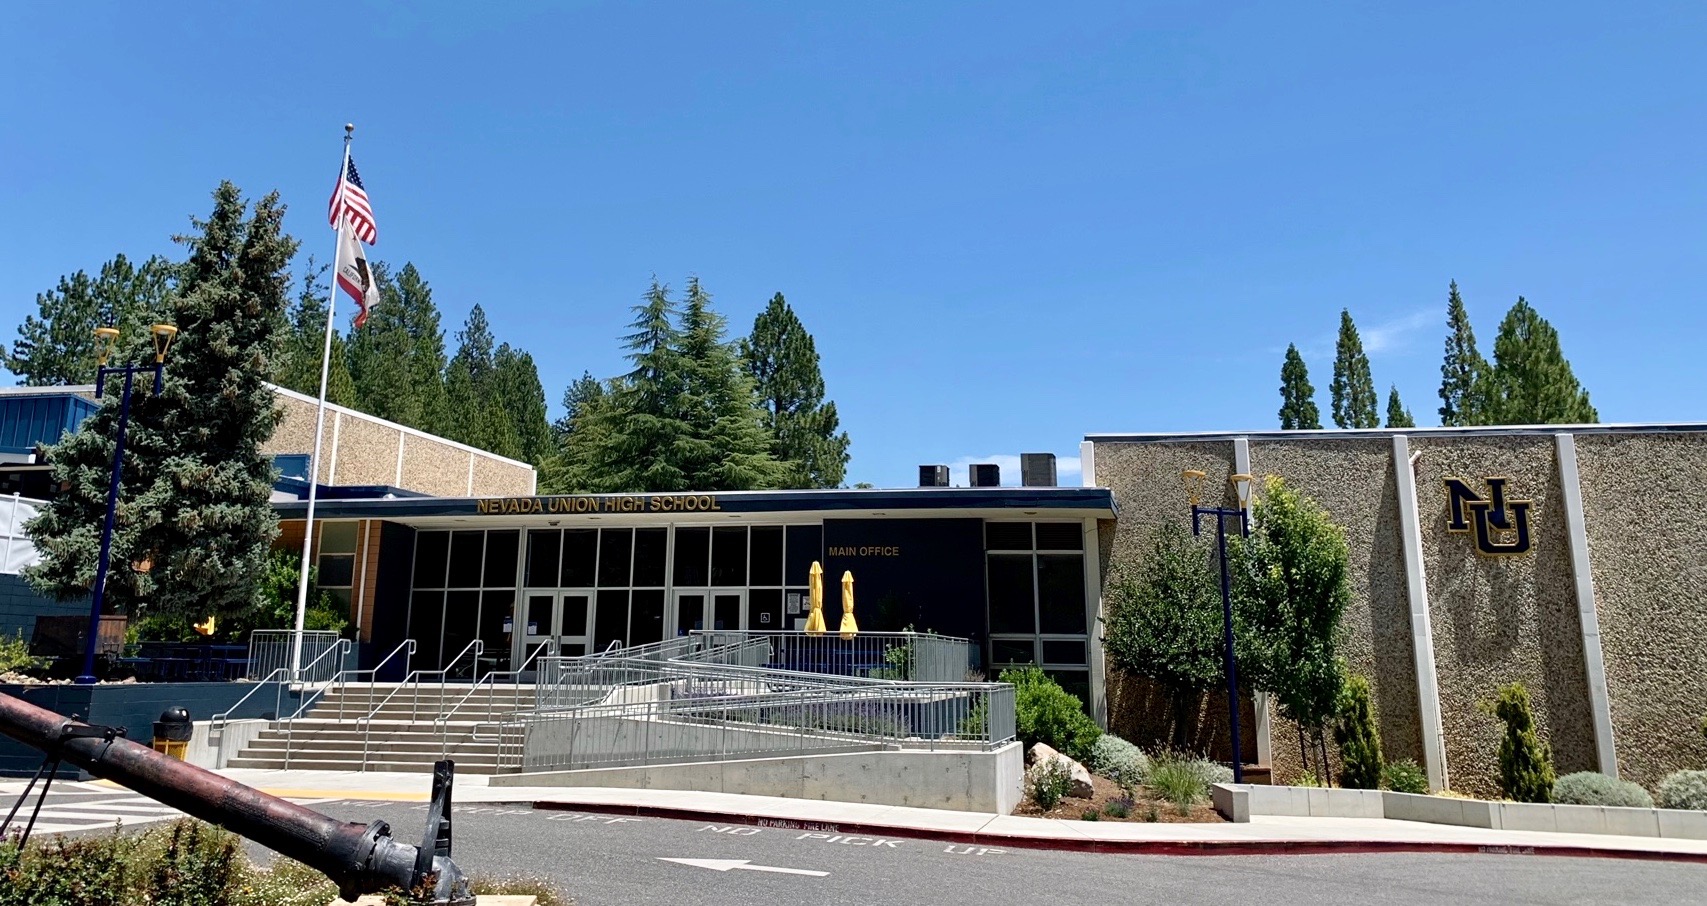 Fight over mask mandate disrupts Nevada City student's senior year